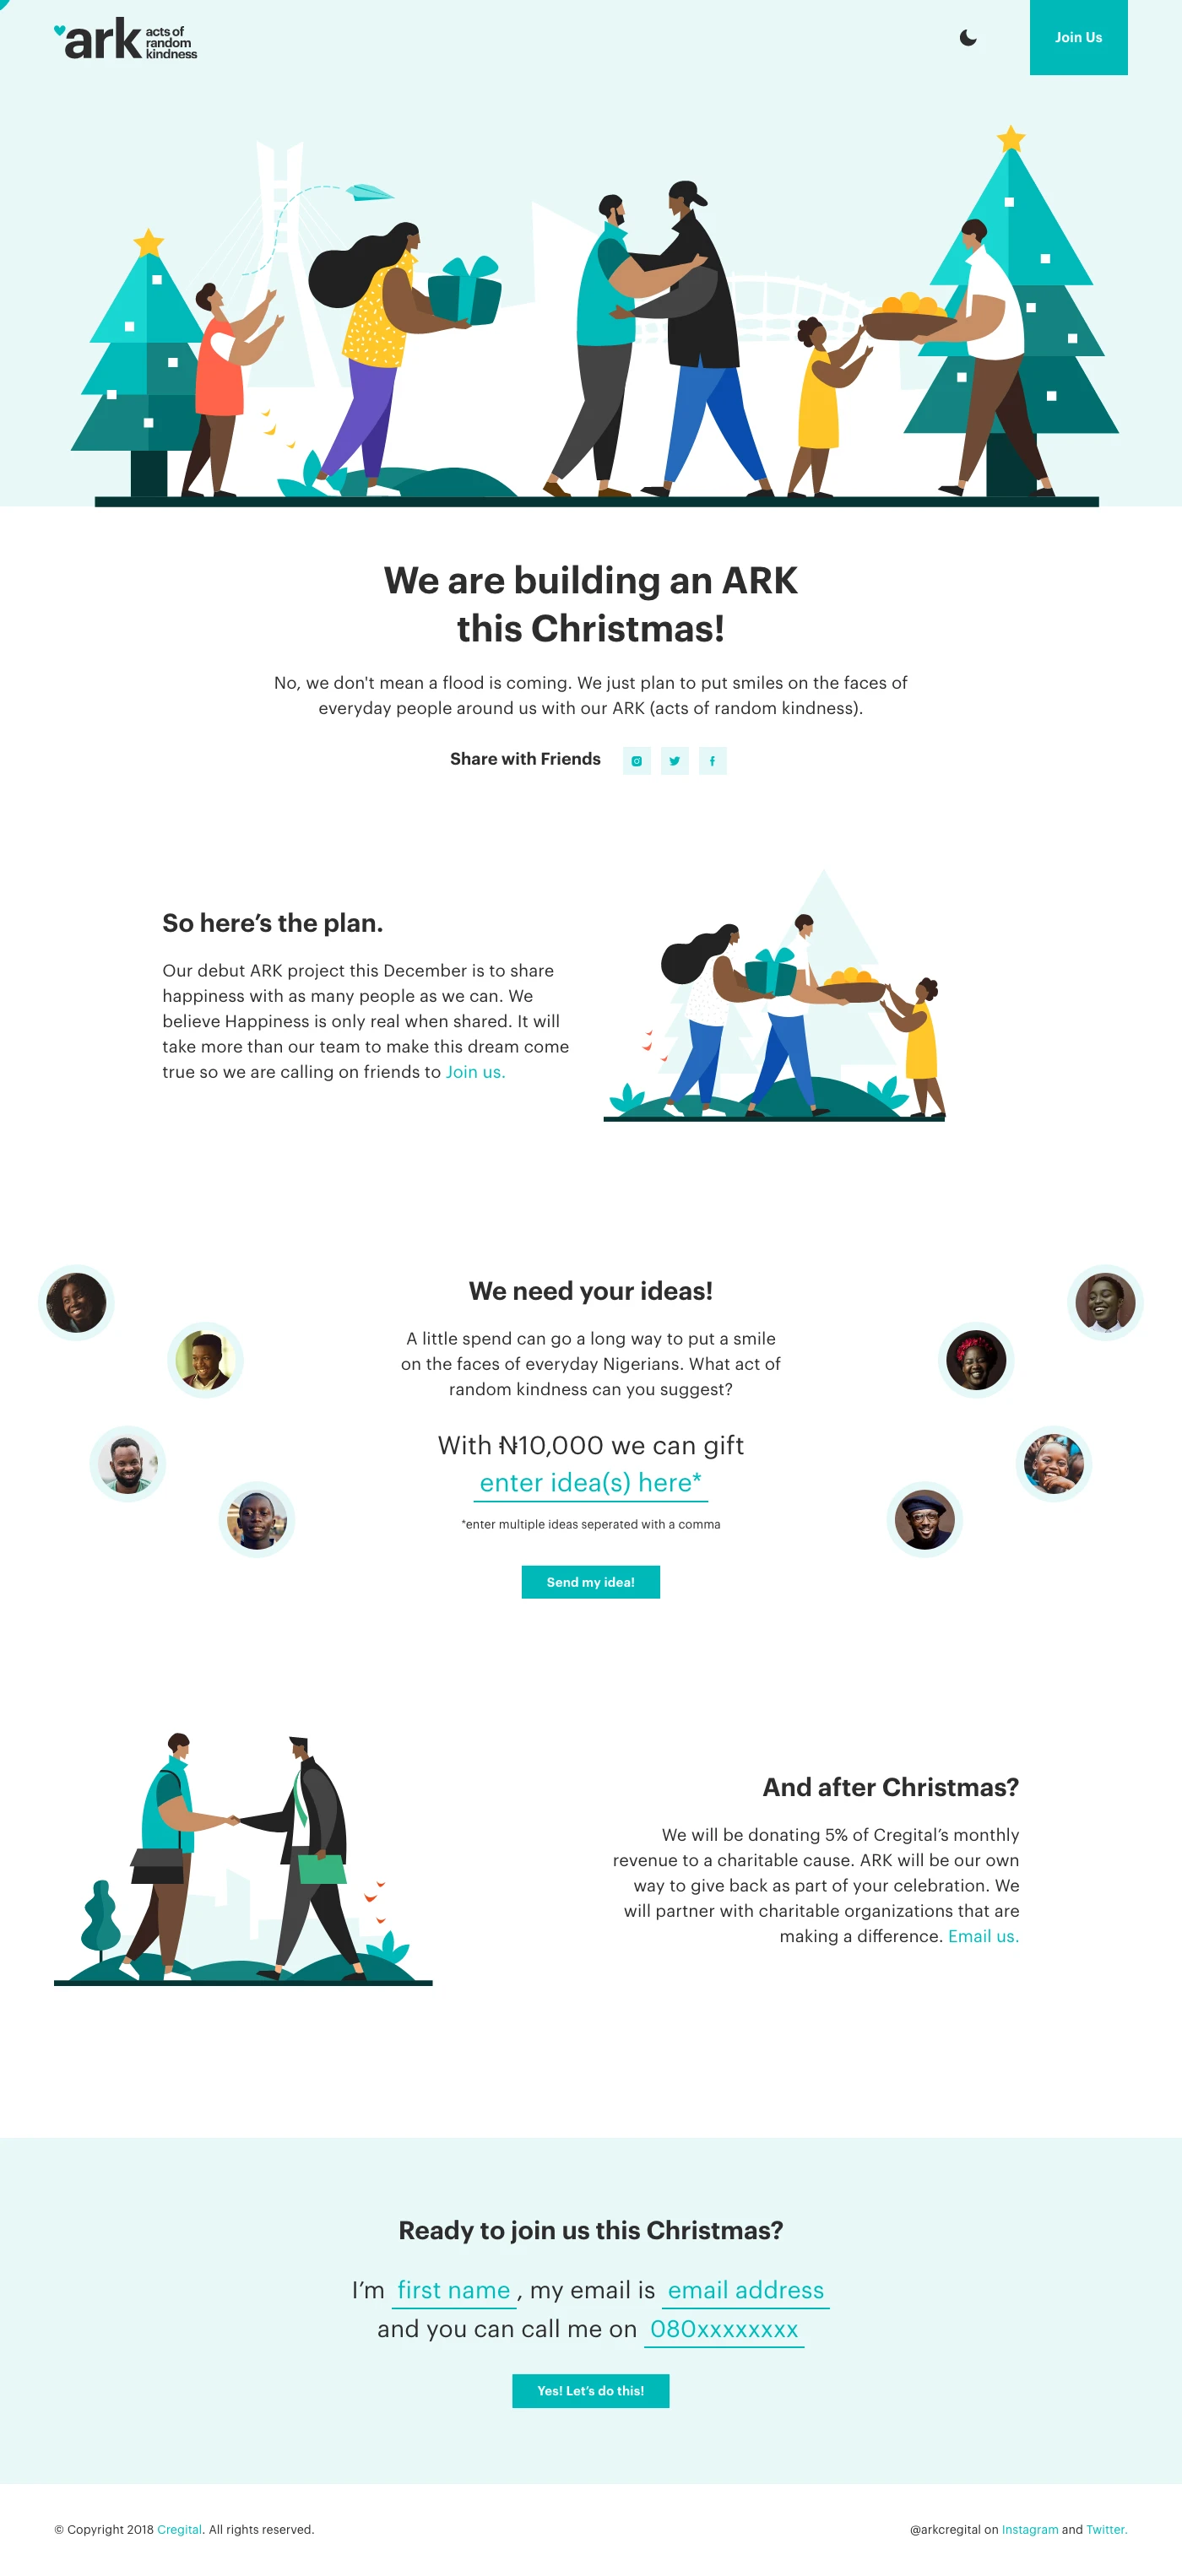 ARK by Cregital Landing Page Example: Sharing happiness with as many people as we can. We believe happiness is an important component of being healthy and it is only real when shared with others.